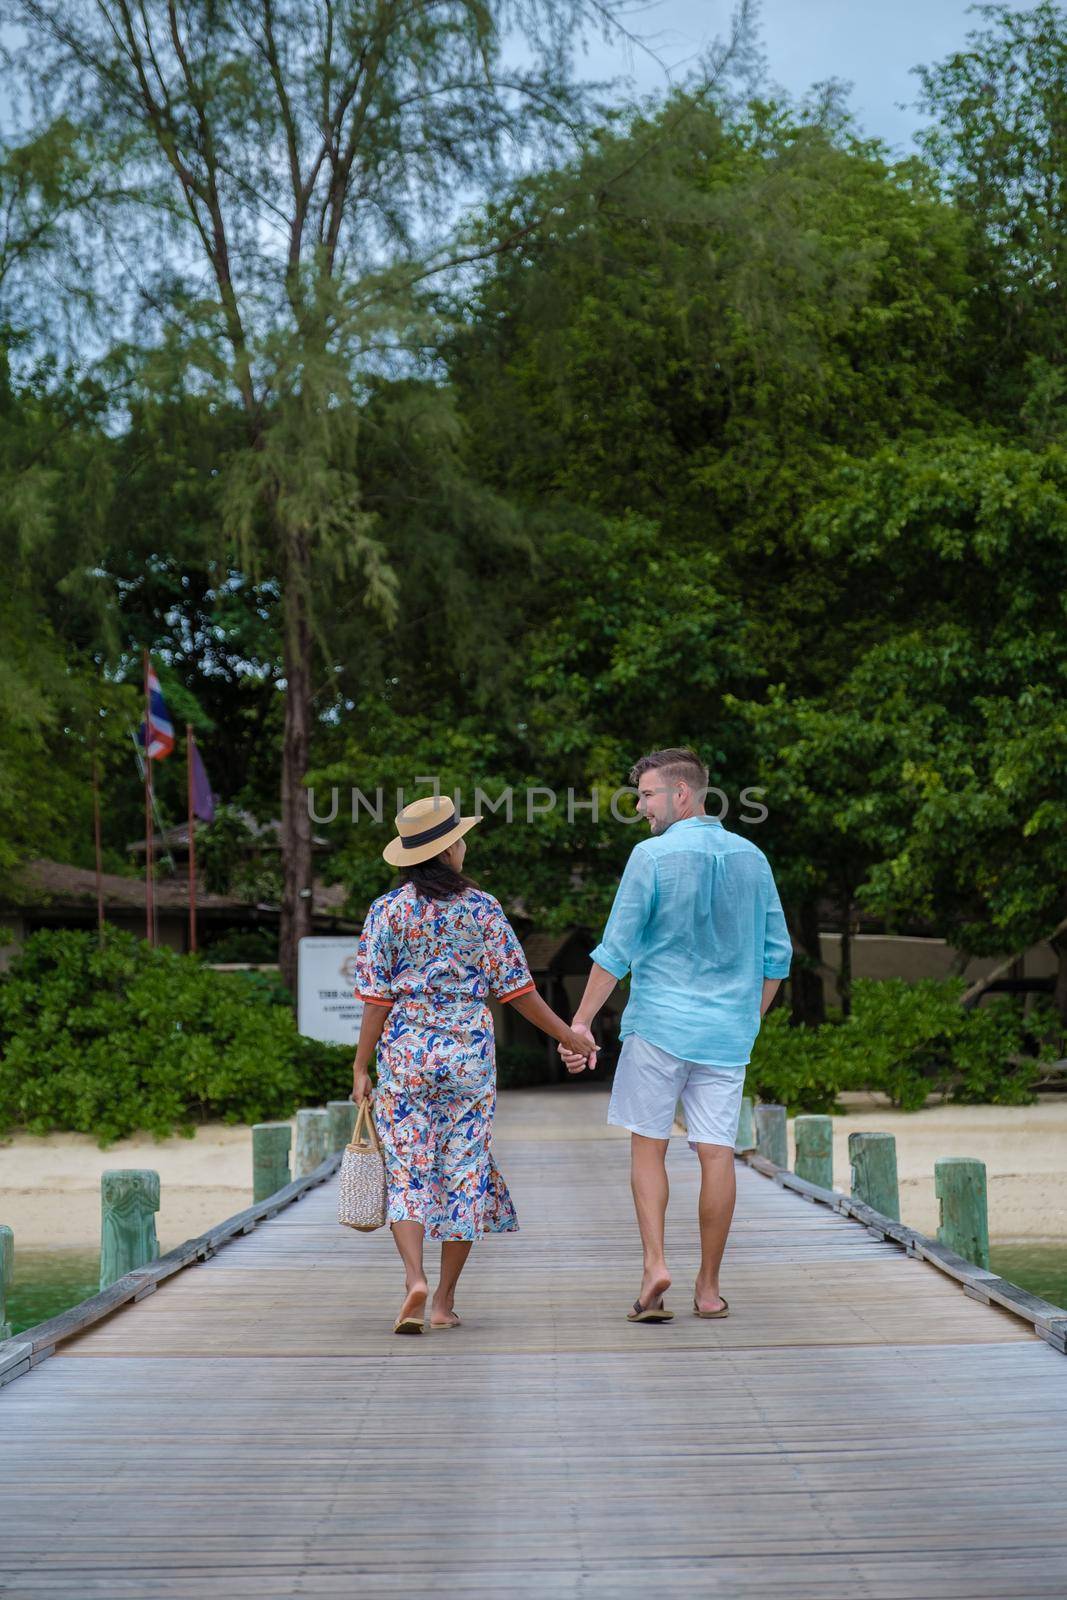 couple men and woman on a tropical isalnd with wooden pier jetty, by fokkebok